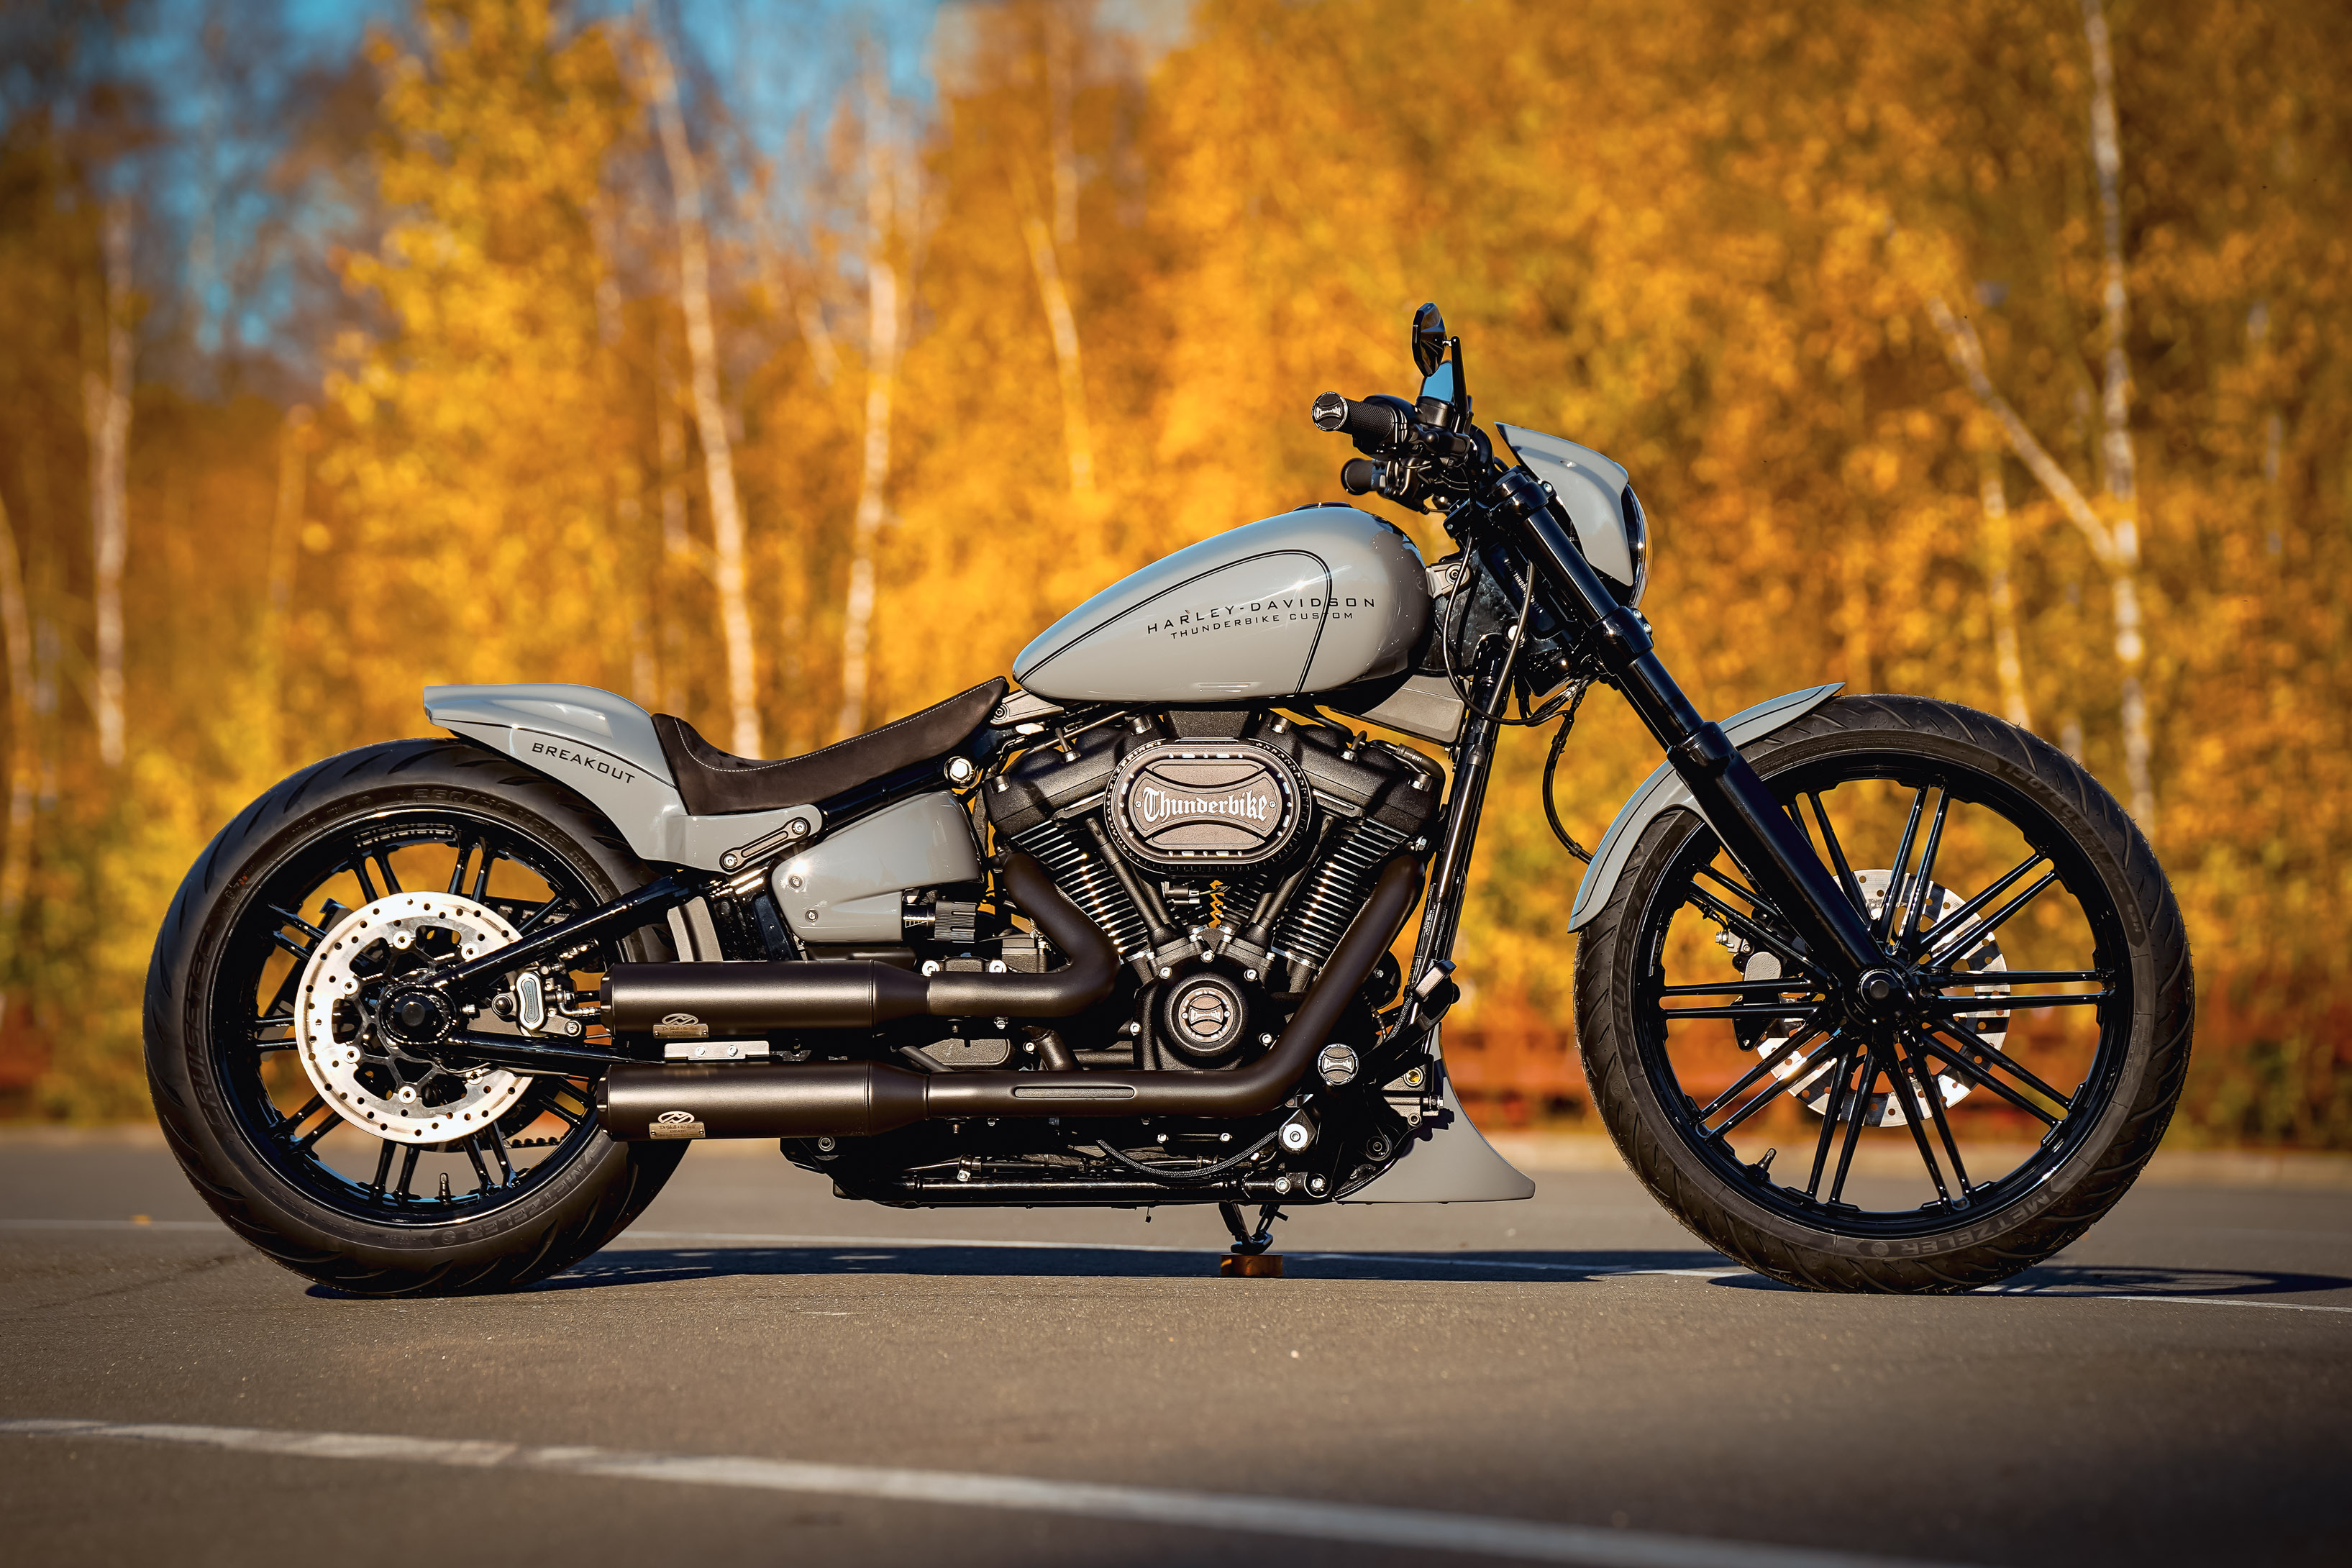 Customized Harley-Davidson Softail Breakout motorcycles by Thunderbike